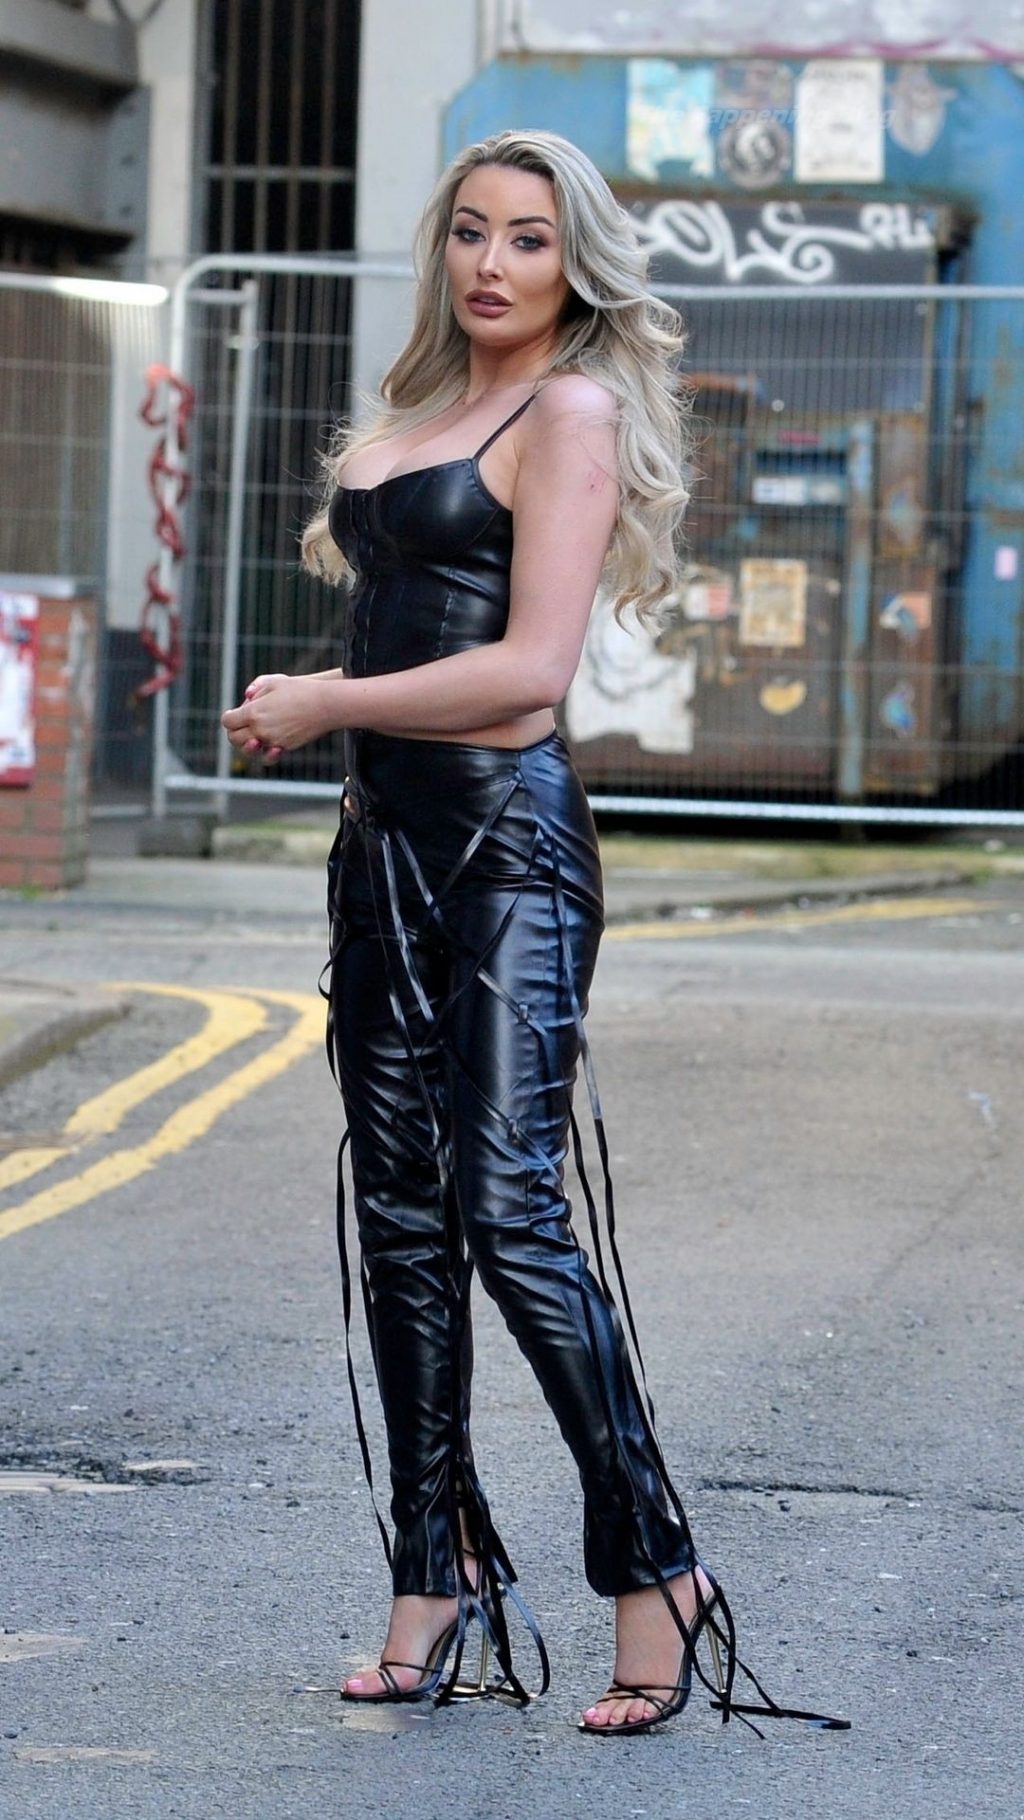 Chloe Crowhurst Puts on Very Busty Display in Manchester (12 Photos)